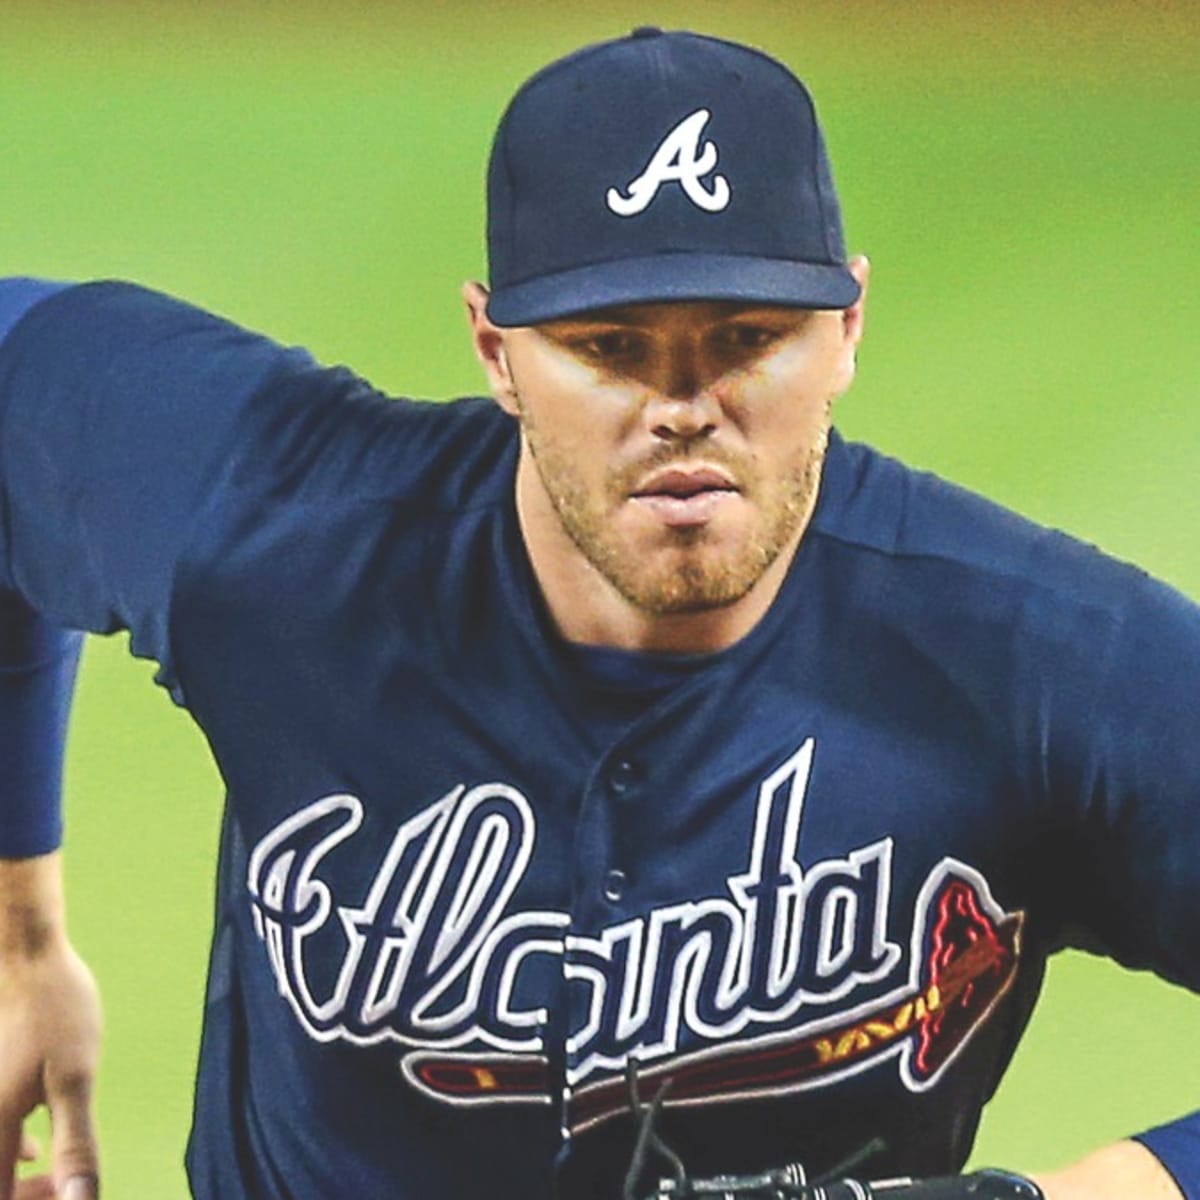 Catching up with the Baby Braves of the 2005 Atlanta Braves team